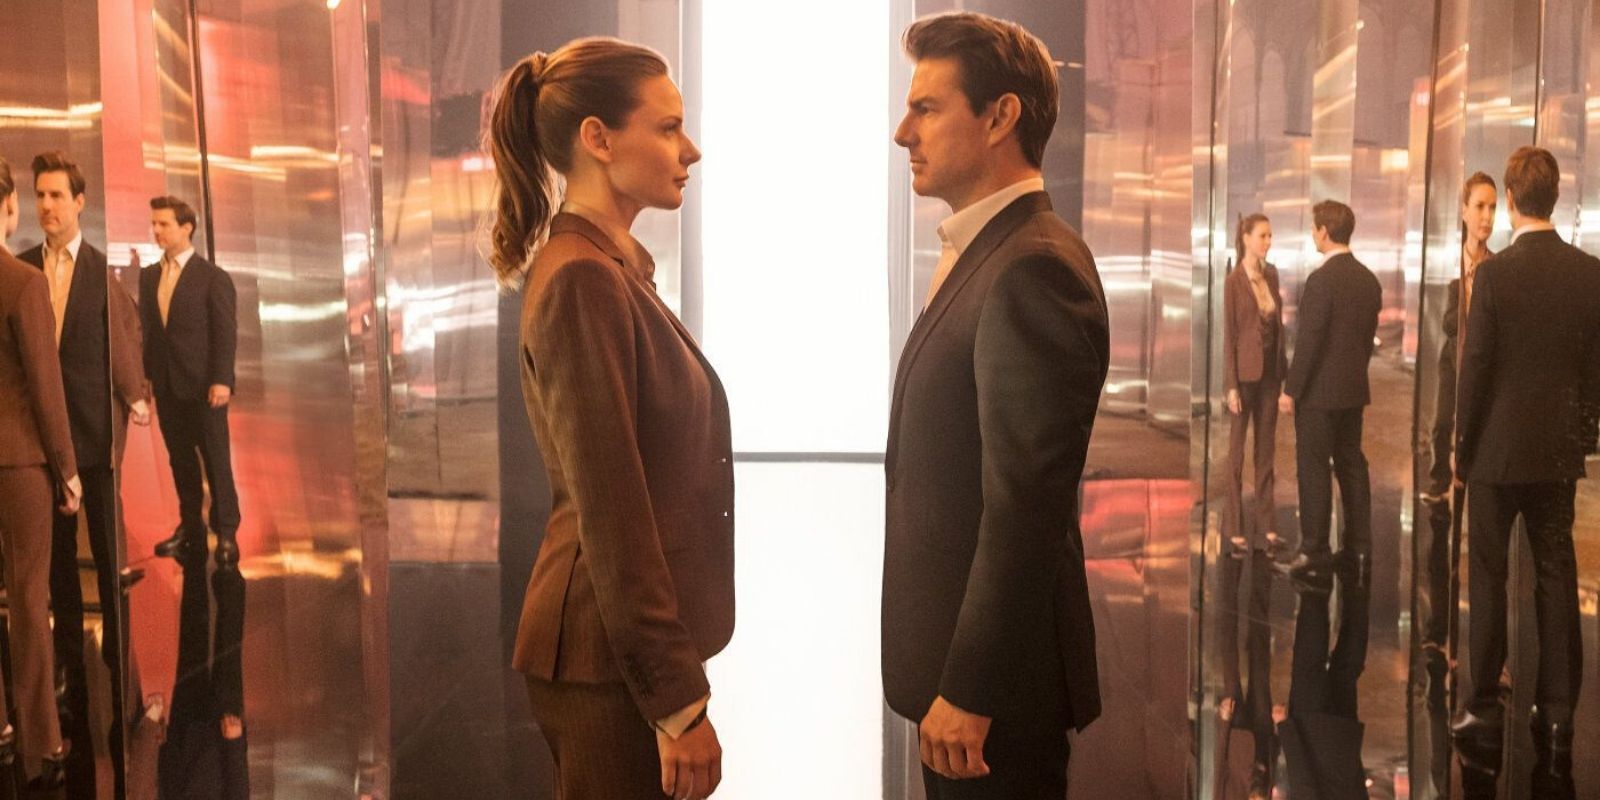 Mission Impossible 7 — 10 Mistakes From Fallout The Next Film Needs To Avoid